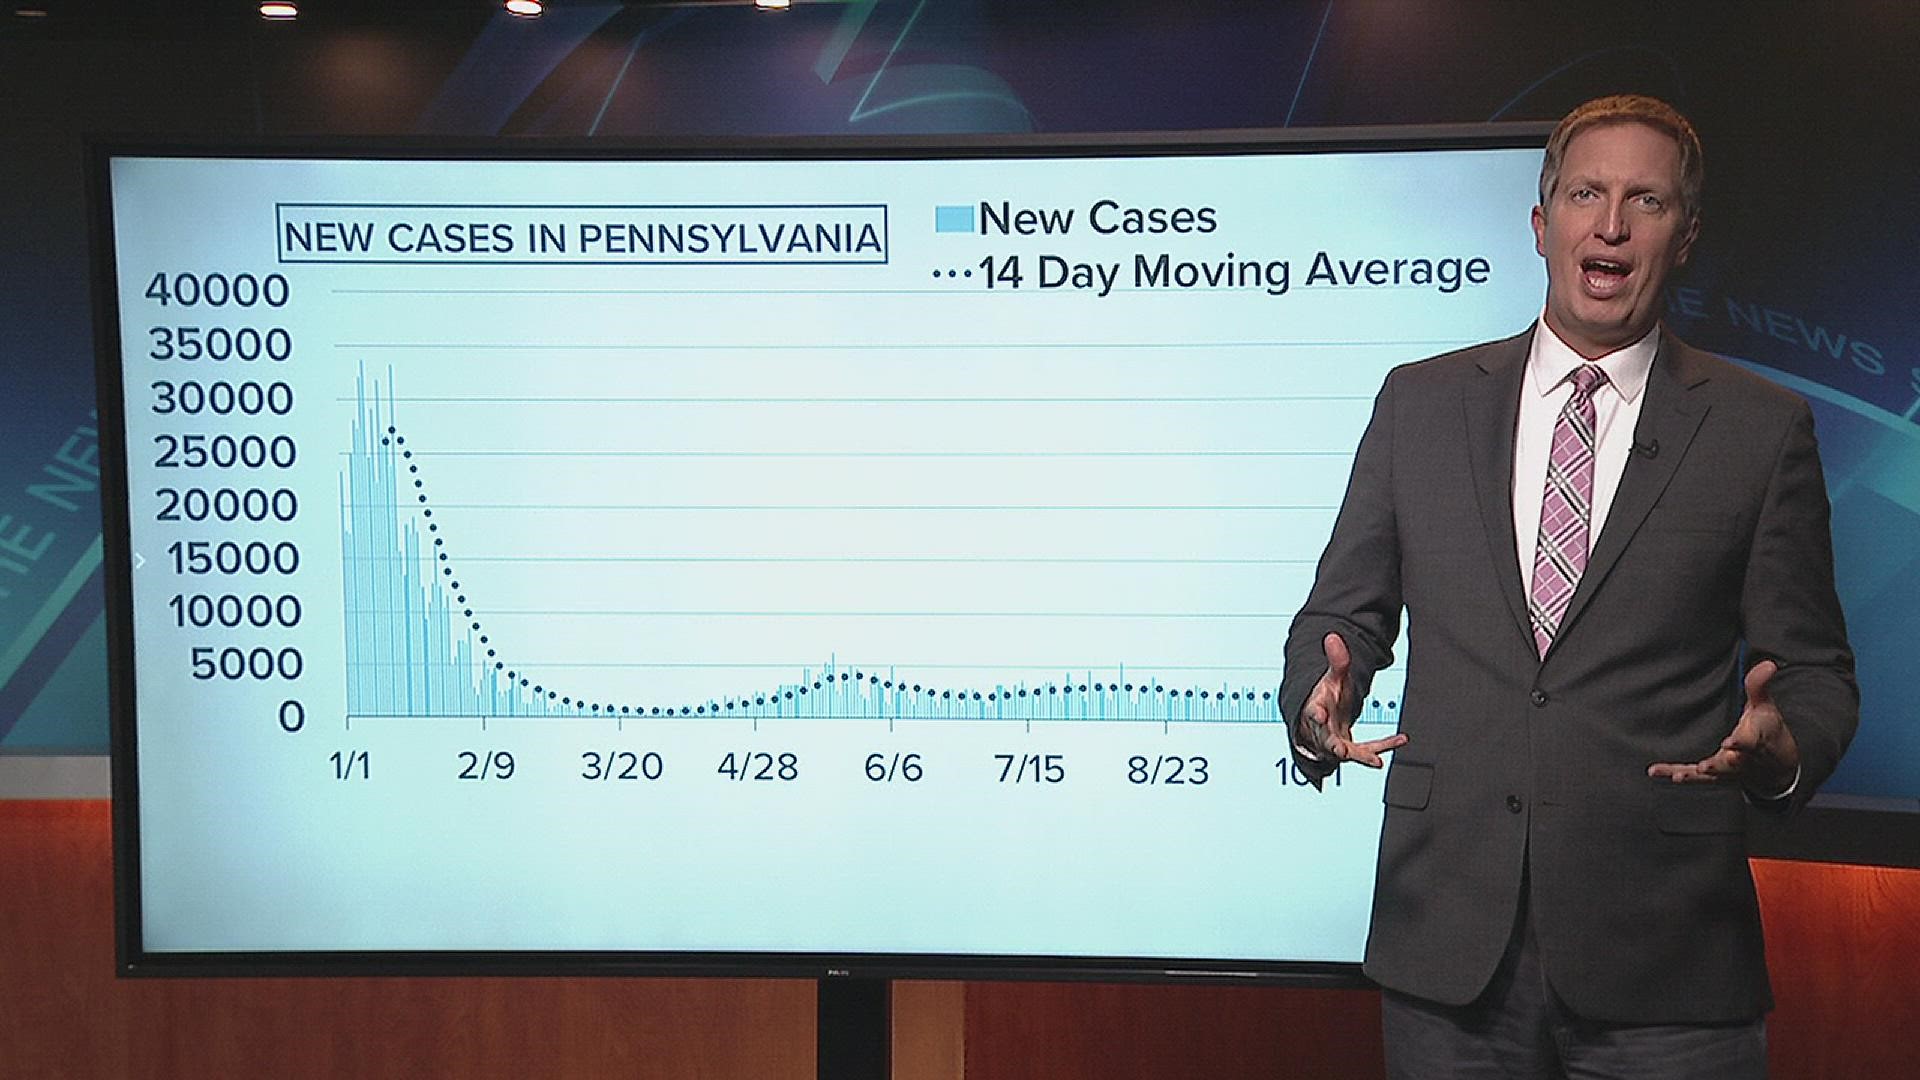 Newswatch 16's Jon Meyer offers some analysis of last week's COVID-19 data from the state.